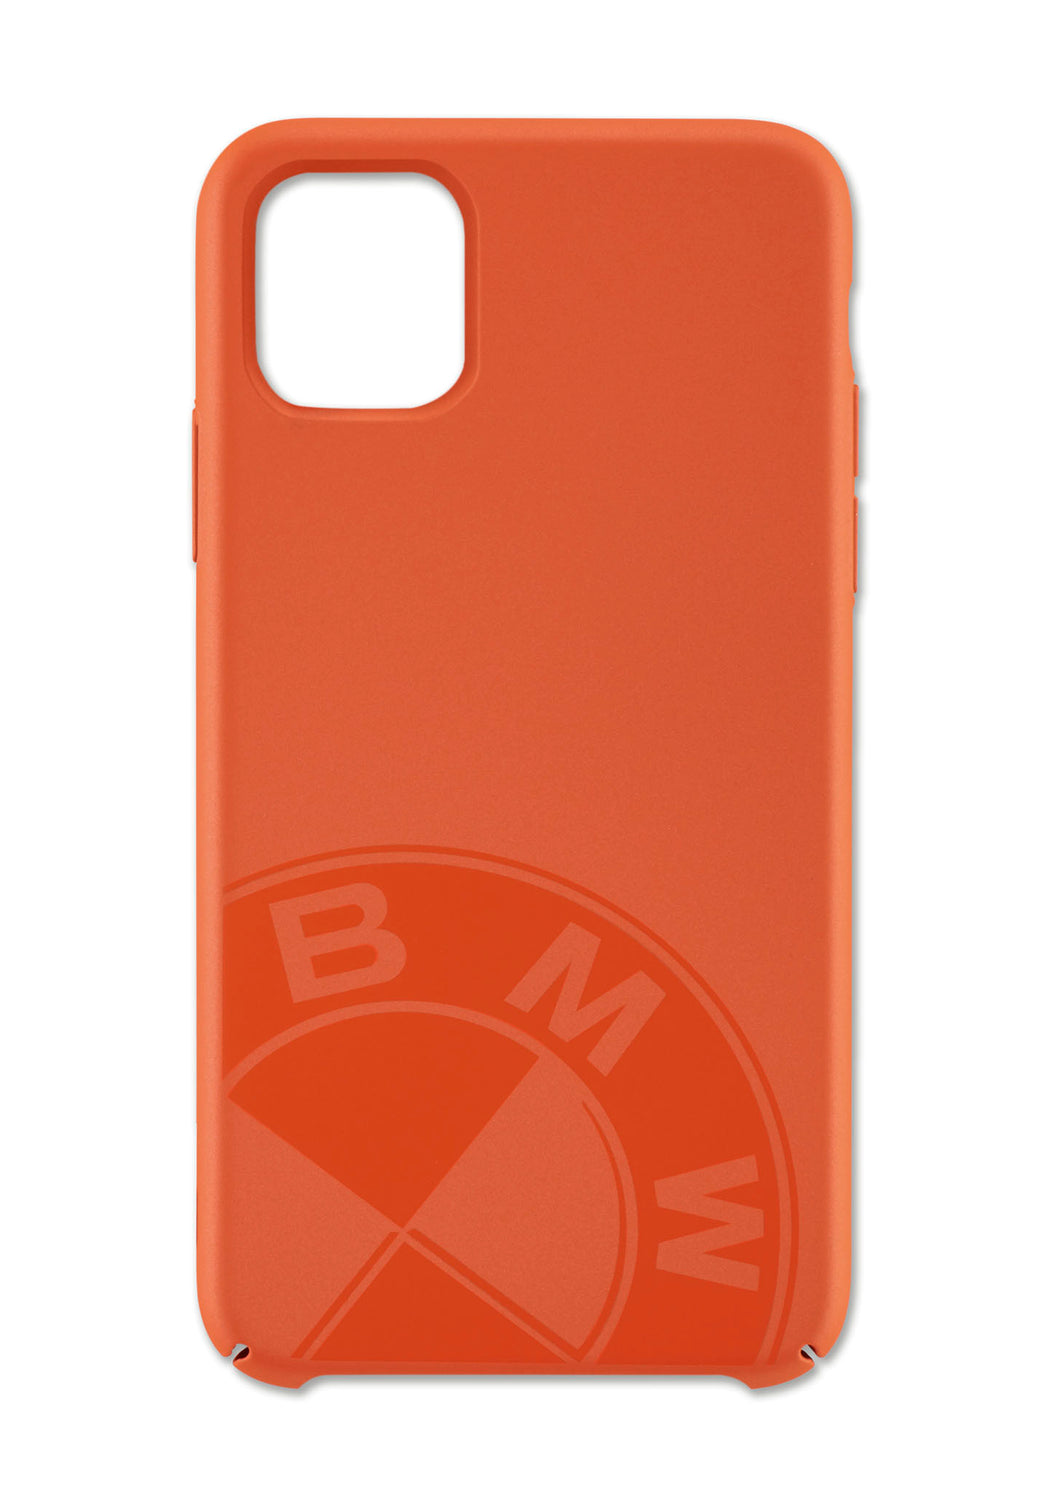 BMW Mobile iPhone 11 Pro Cover